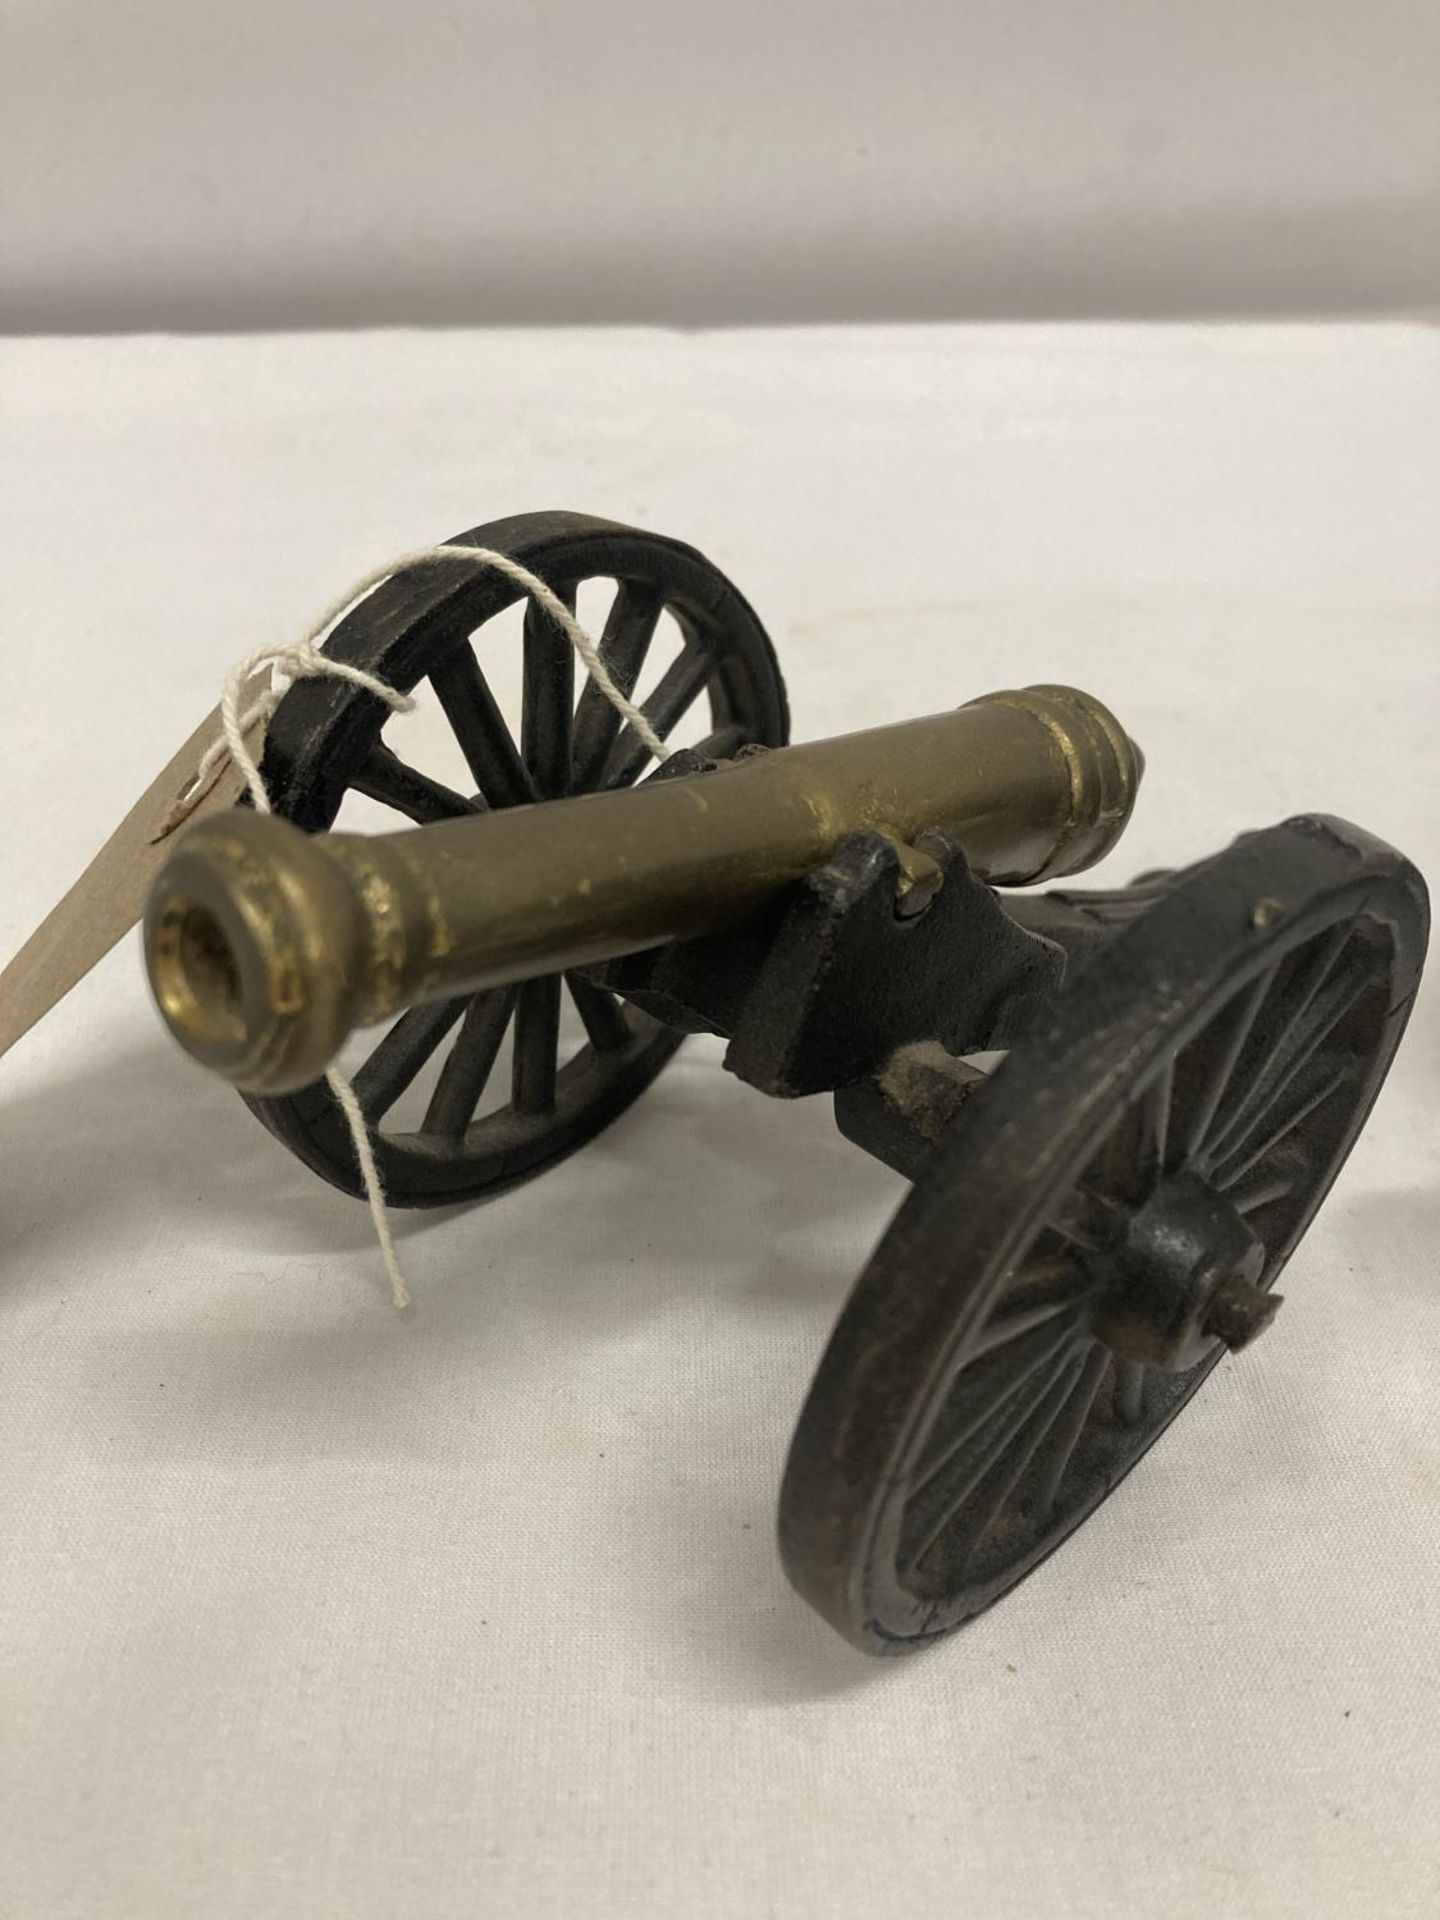 A PAIR OF NON FIRING MODEL NAPOLEONIC WAR CANNONS, 12.5CM BARRELS, LENGTH 19CM - Image 3 of 3